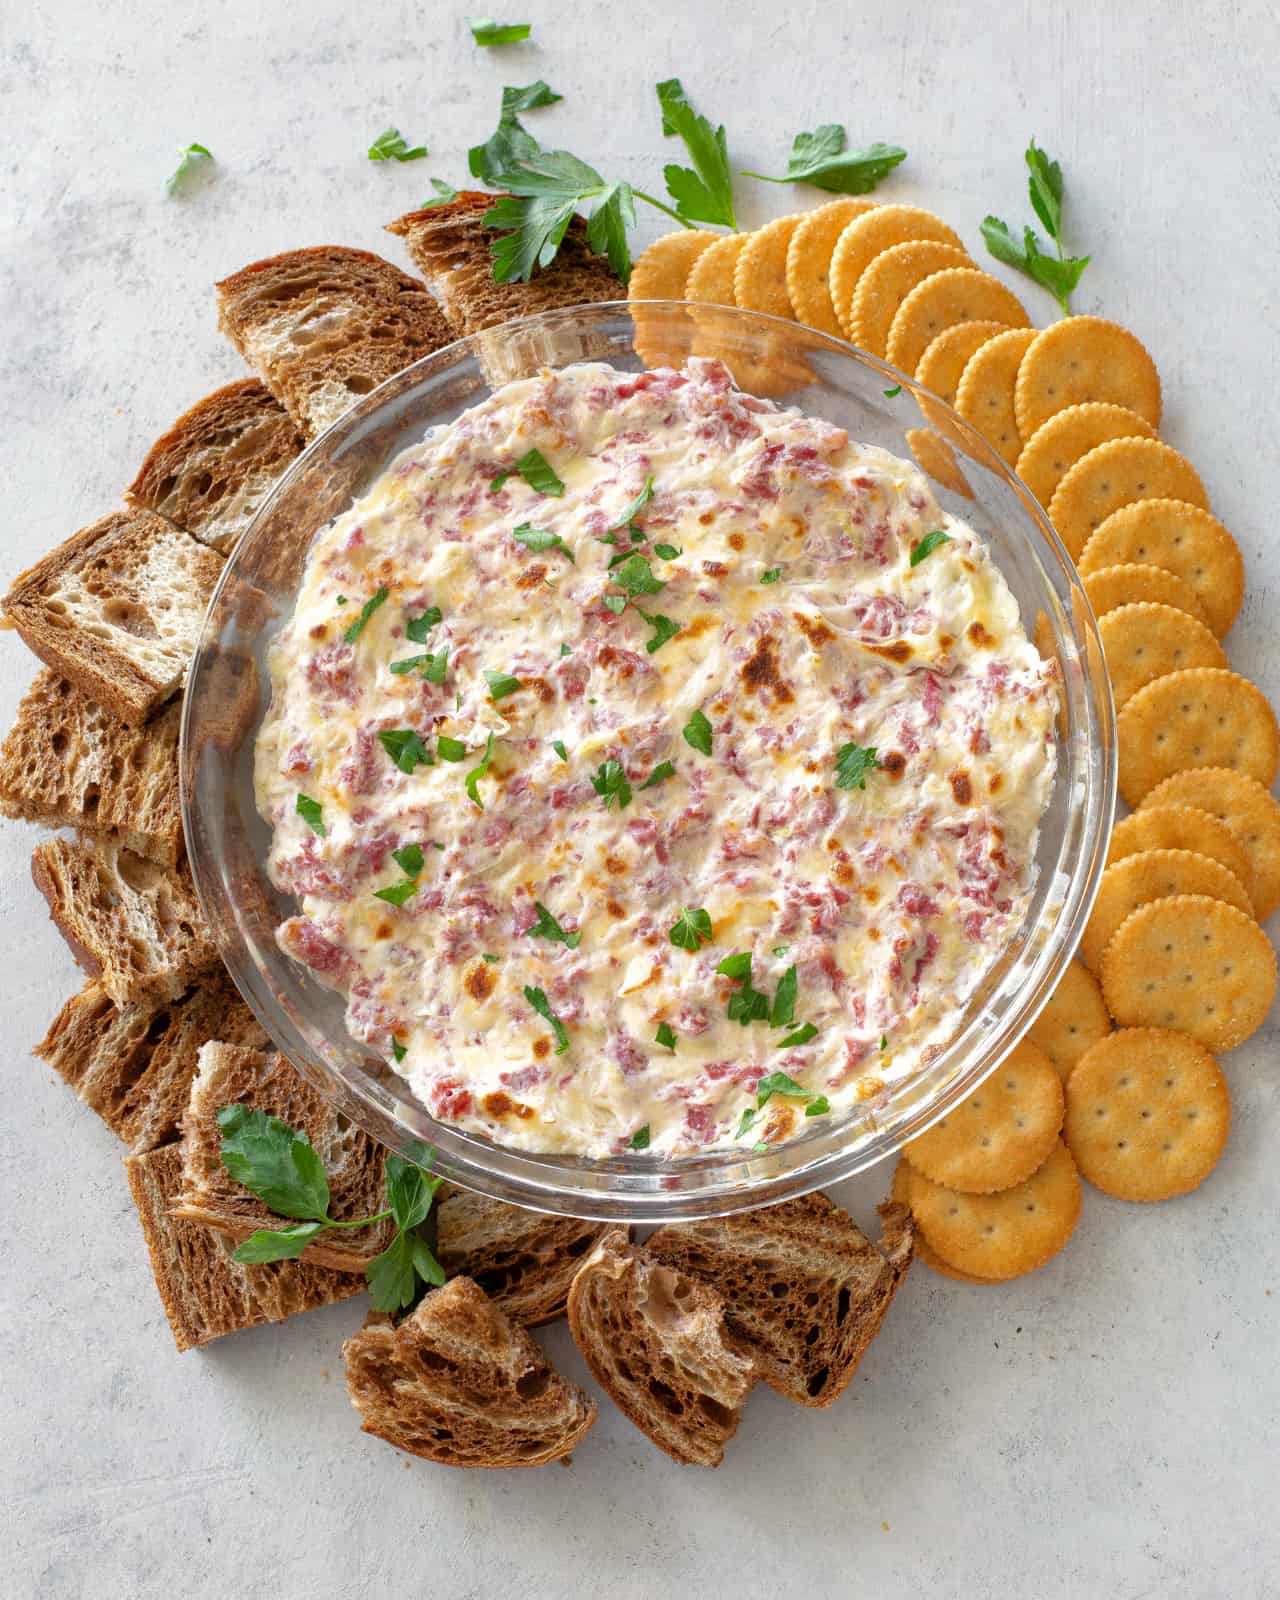 https://www.the-girl-who-ate-everything.com/wp-content/uploads/2011/03/reuben-dip-recipe-full-size.jpg